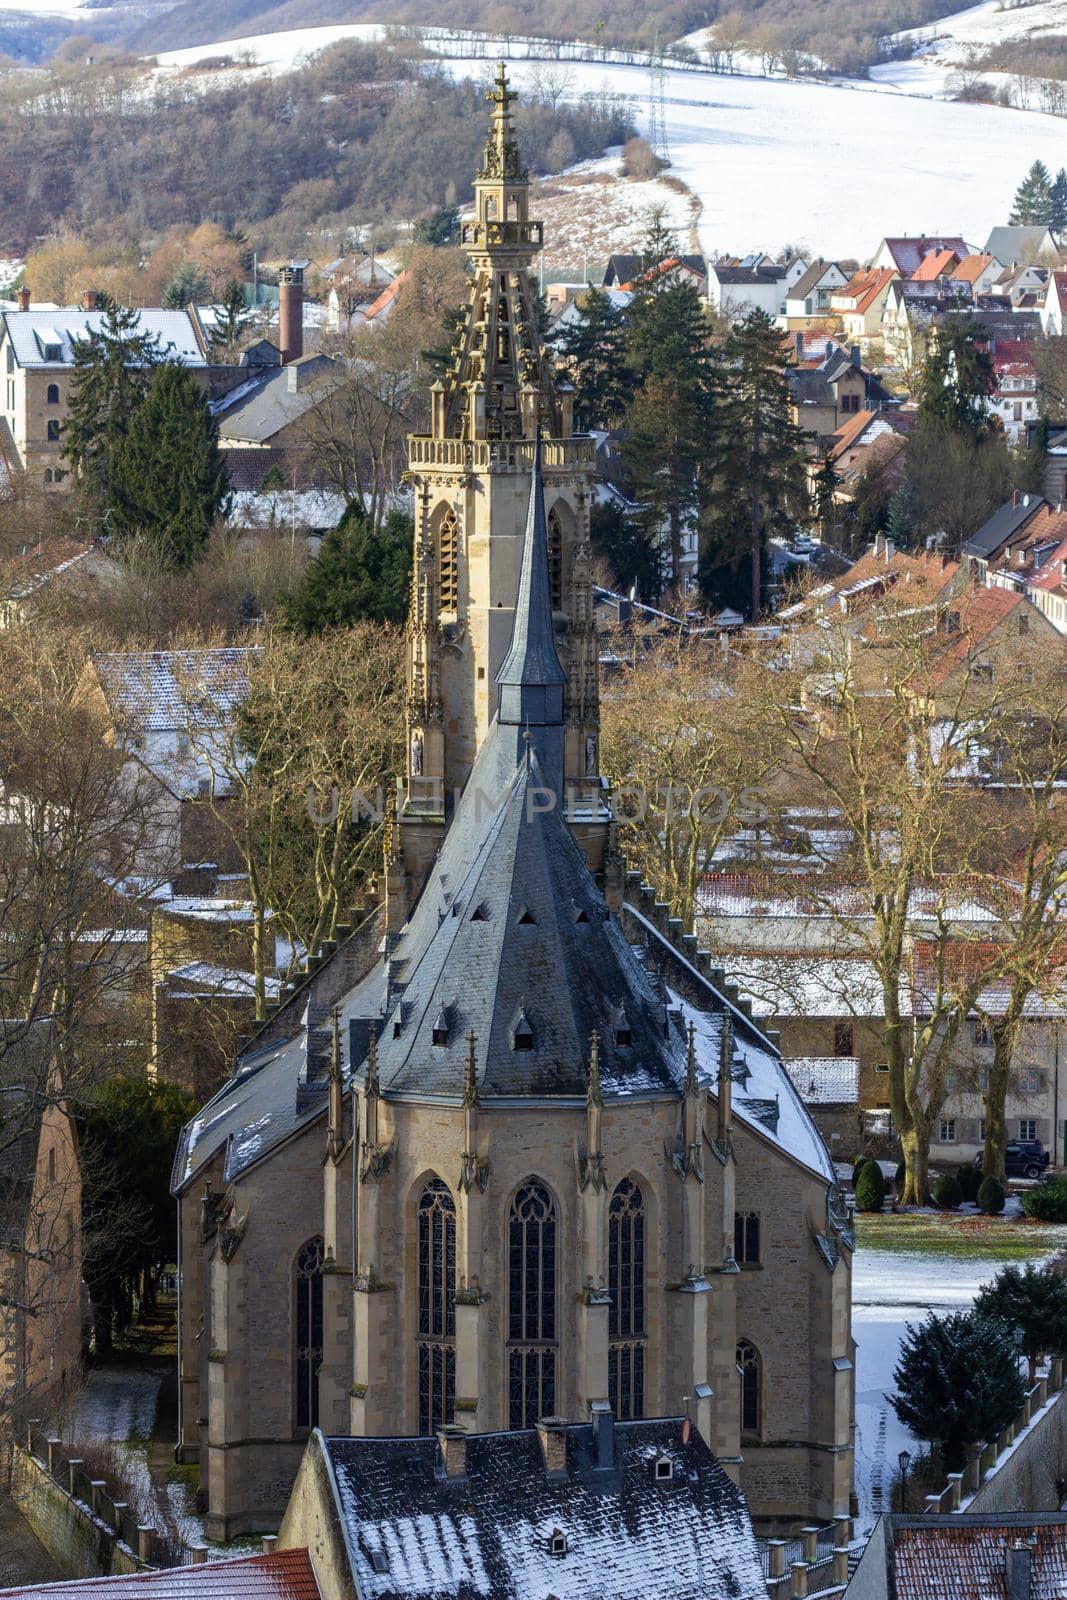 High angle view of the Schlosskirche Meisenheim, Germany in winter with snow